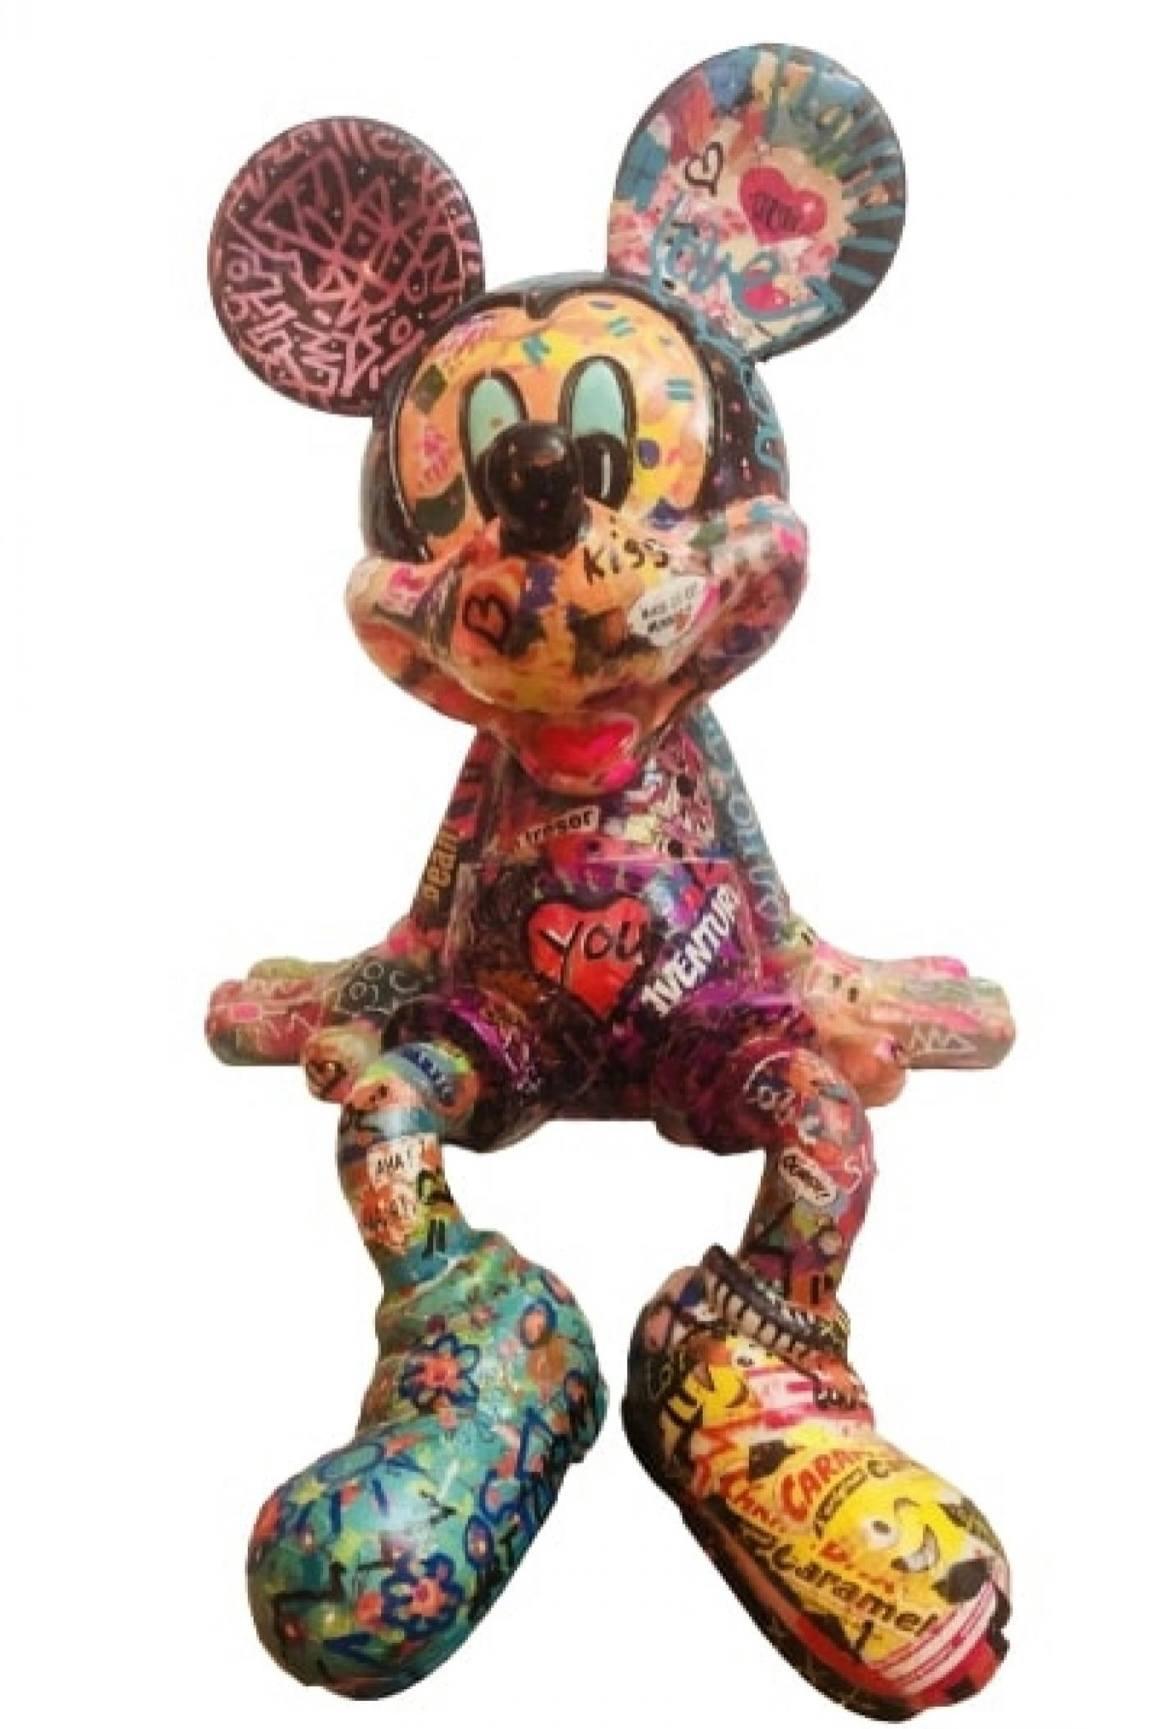 Arty Mickey Mixed Techniques on Resin - Mixed Media Art by Patricia Ducept,